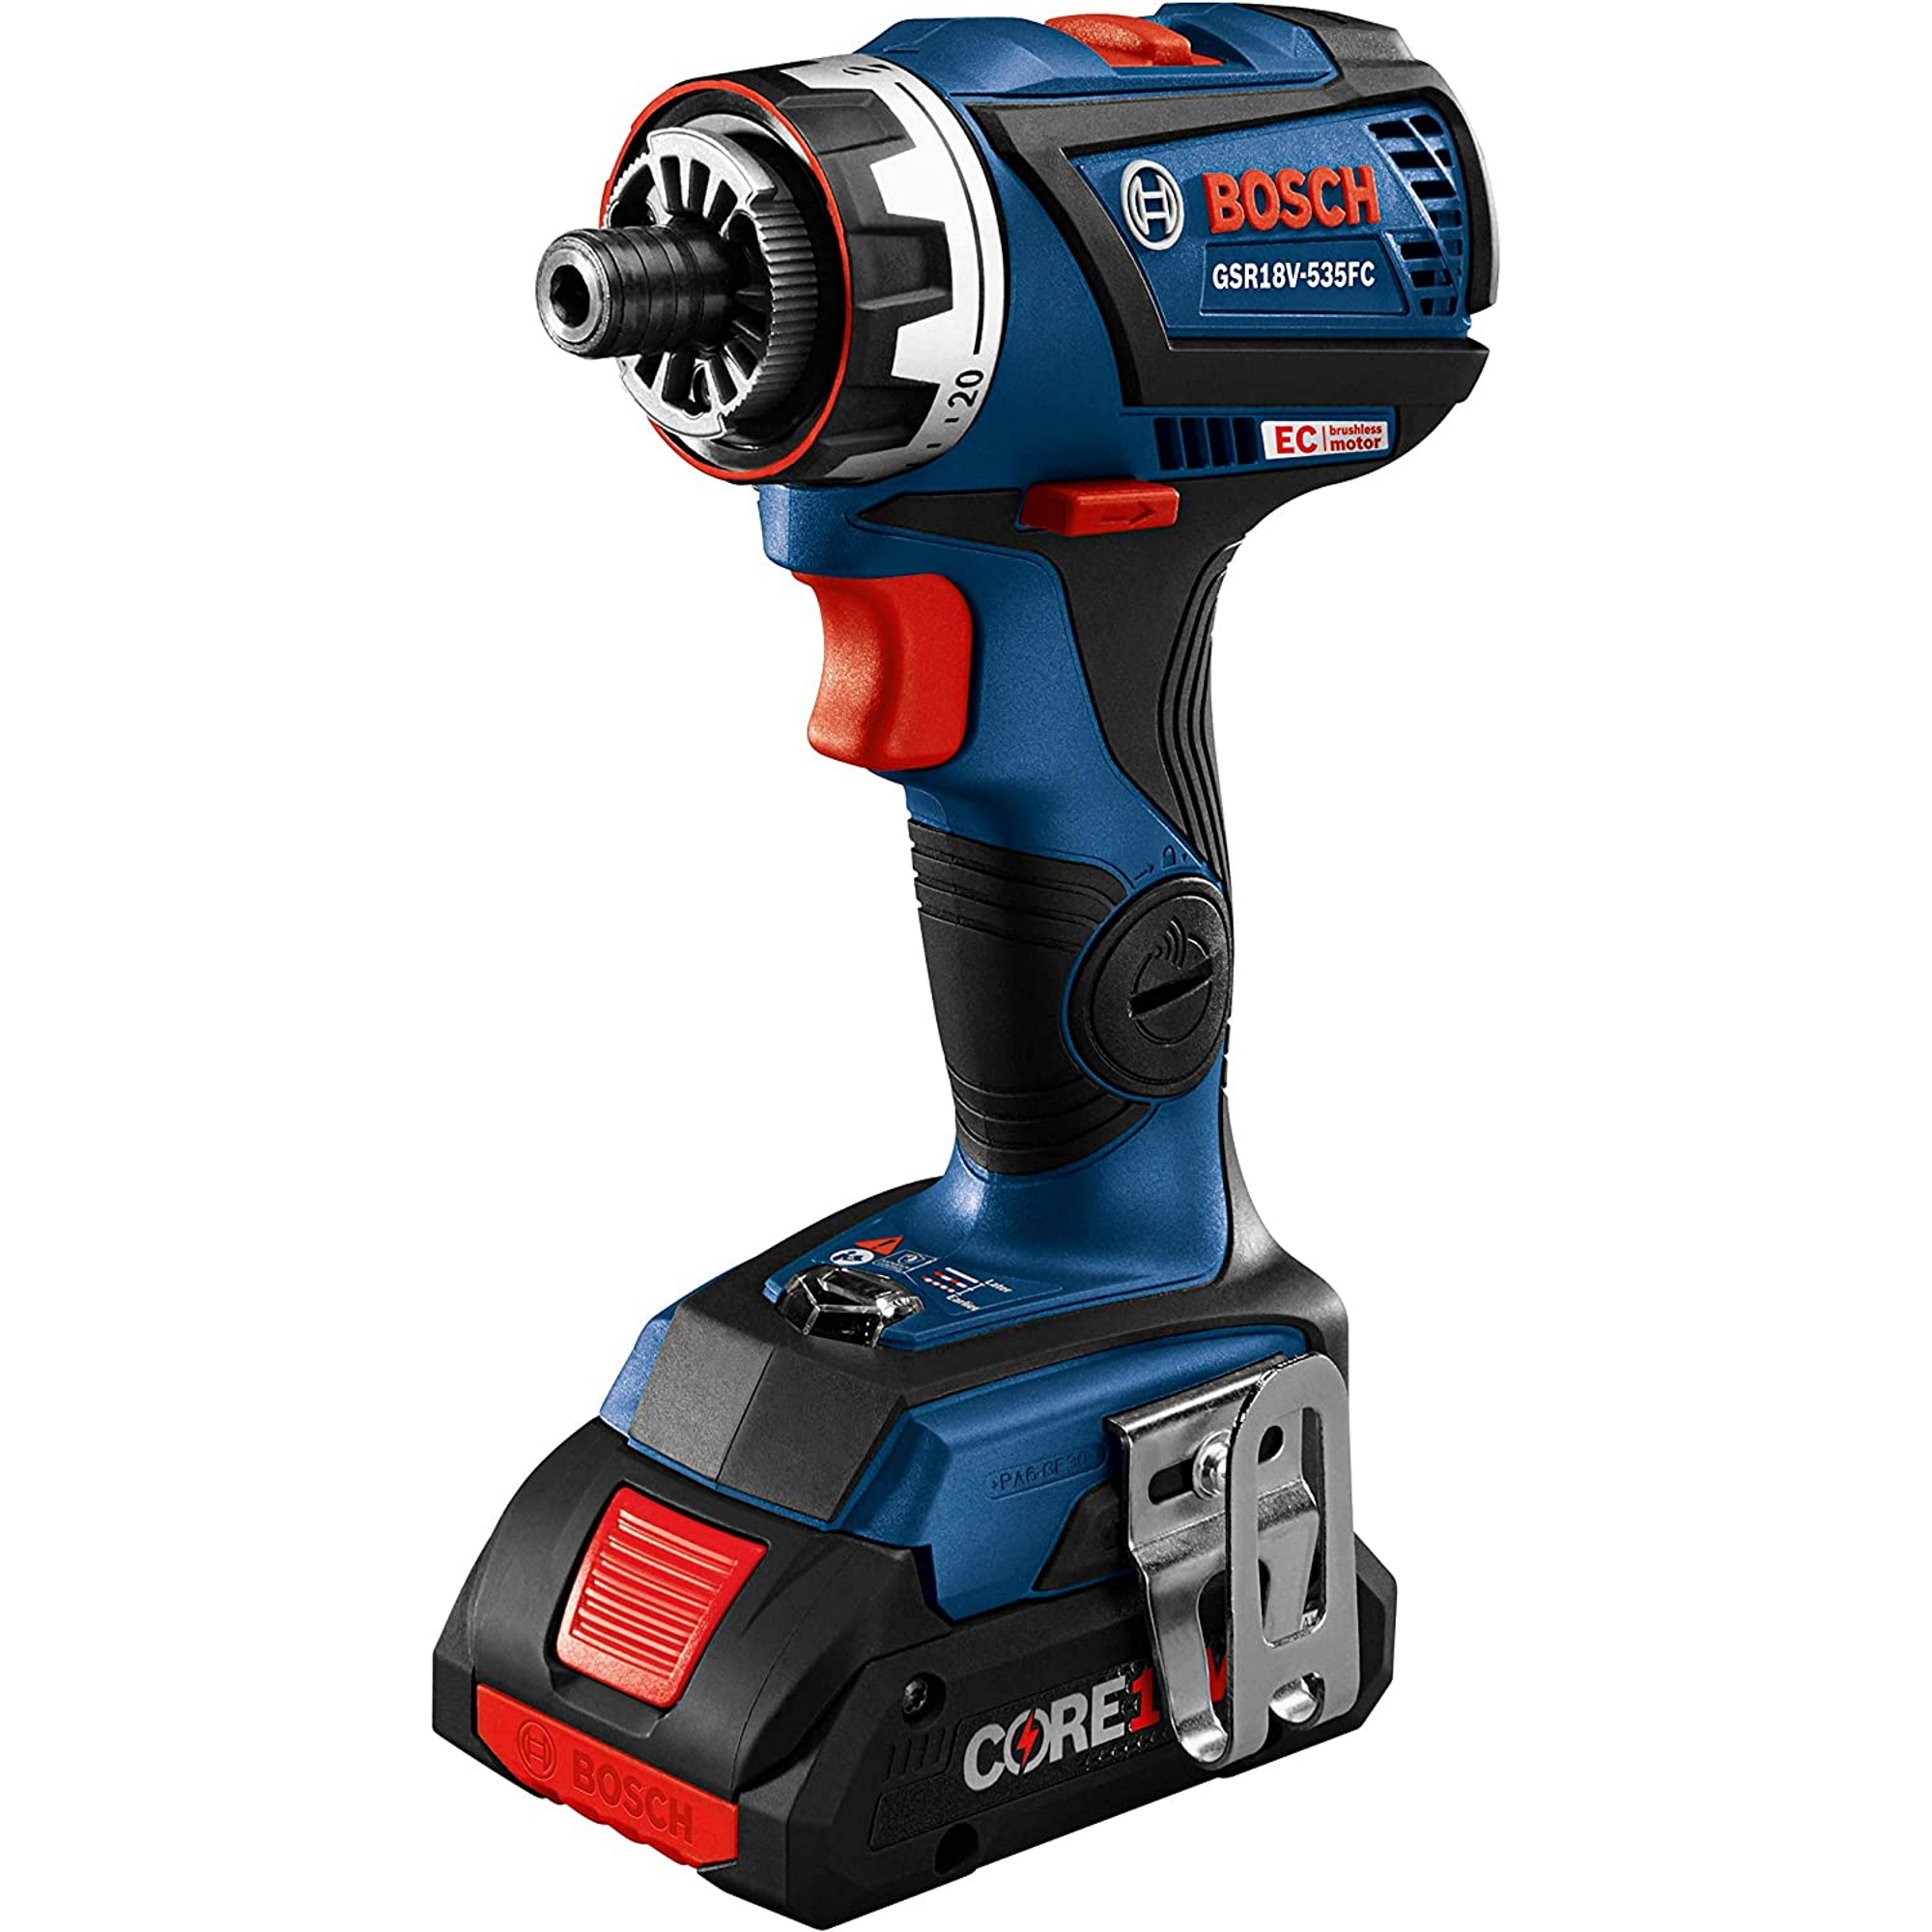 Bosch 18V Chameleon Drill/Driver w/ 5-In-1 Flexiclick System and 4.0 Ah CORE18V Compact Battery